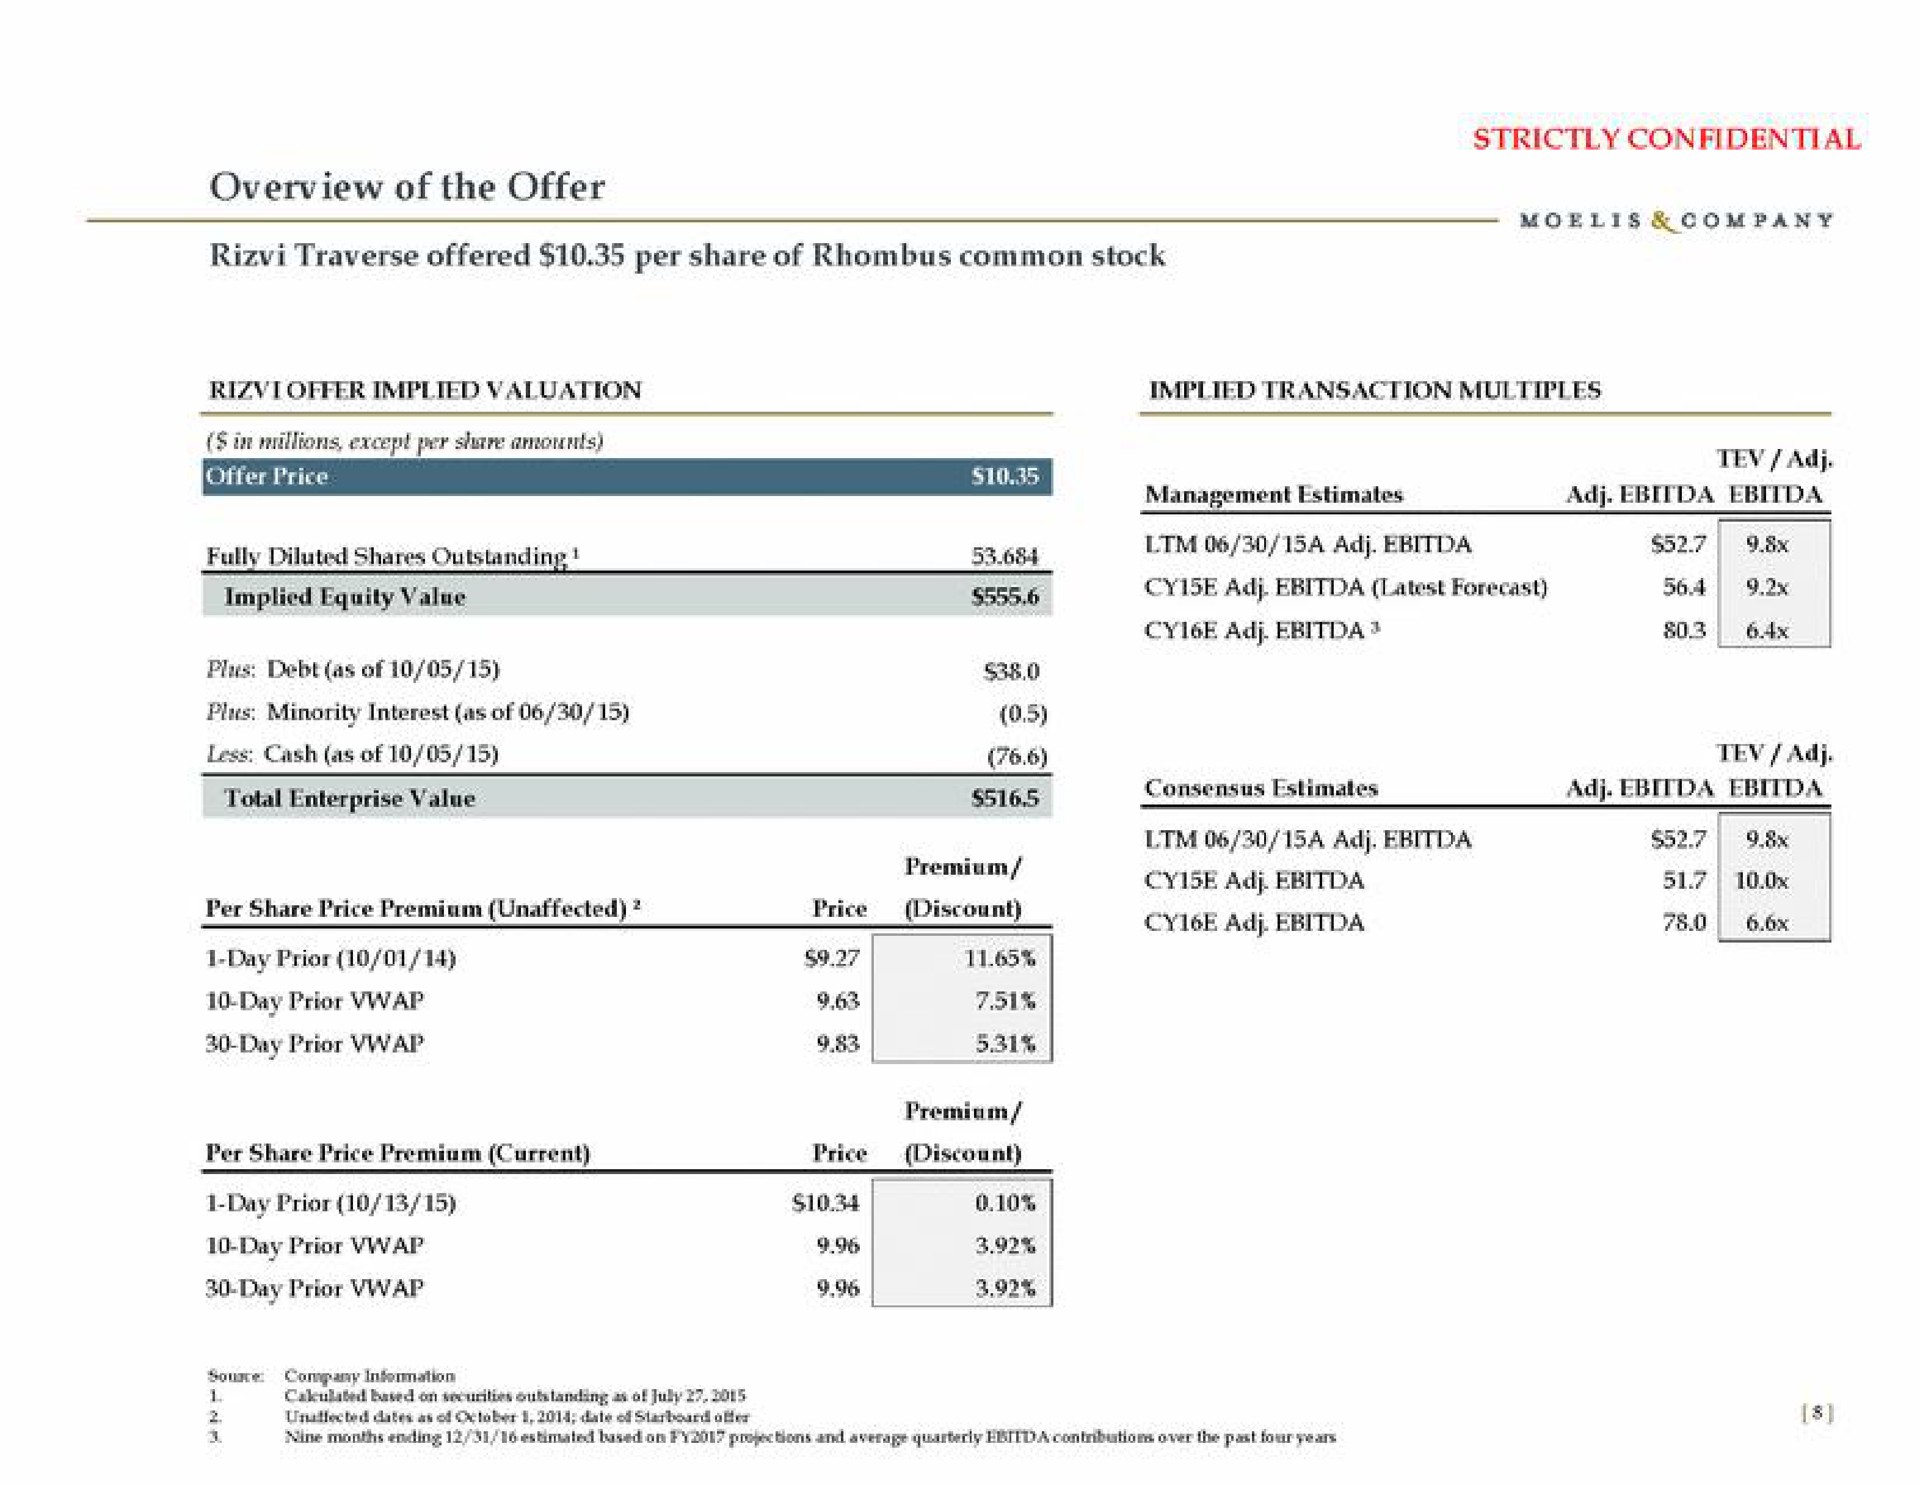 overview of the offer pice a sess cisco management estimates latest forecast a | Moelis & Company